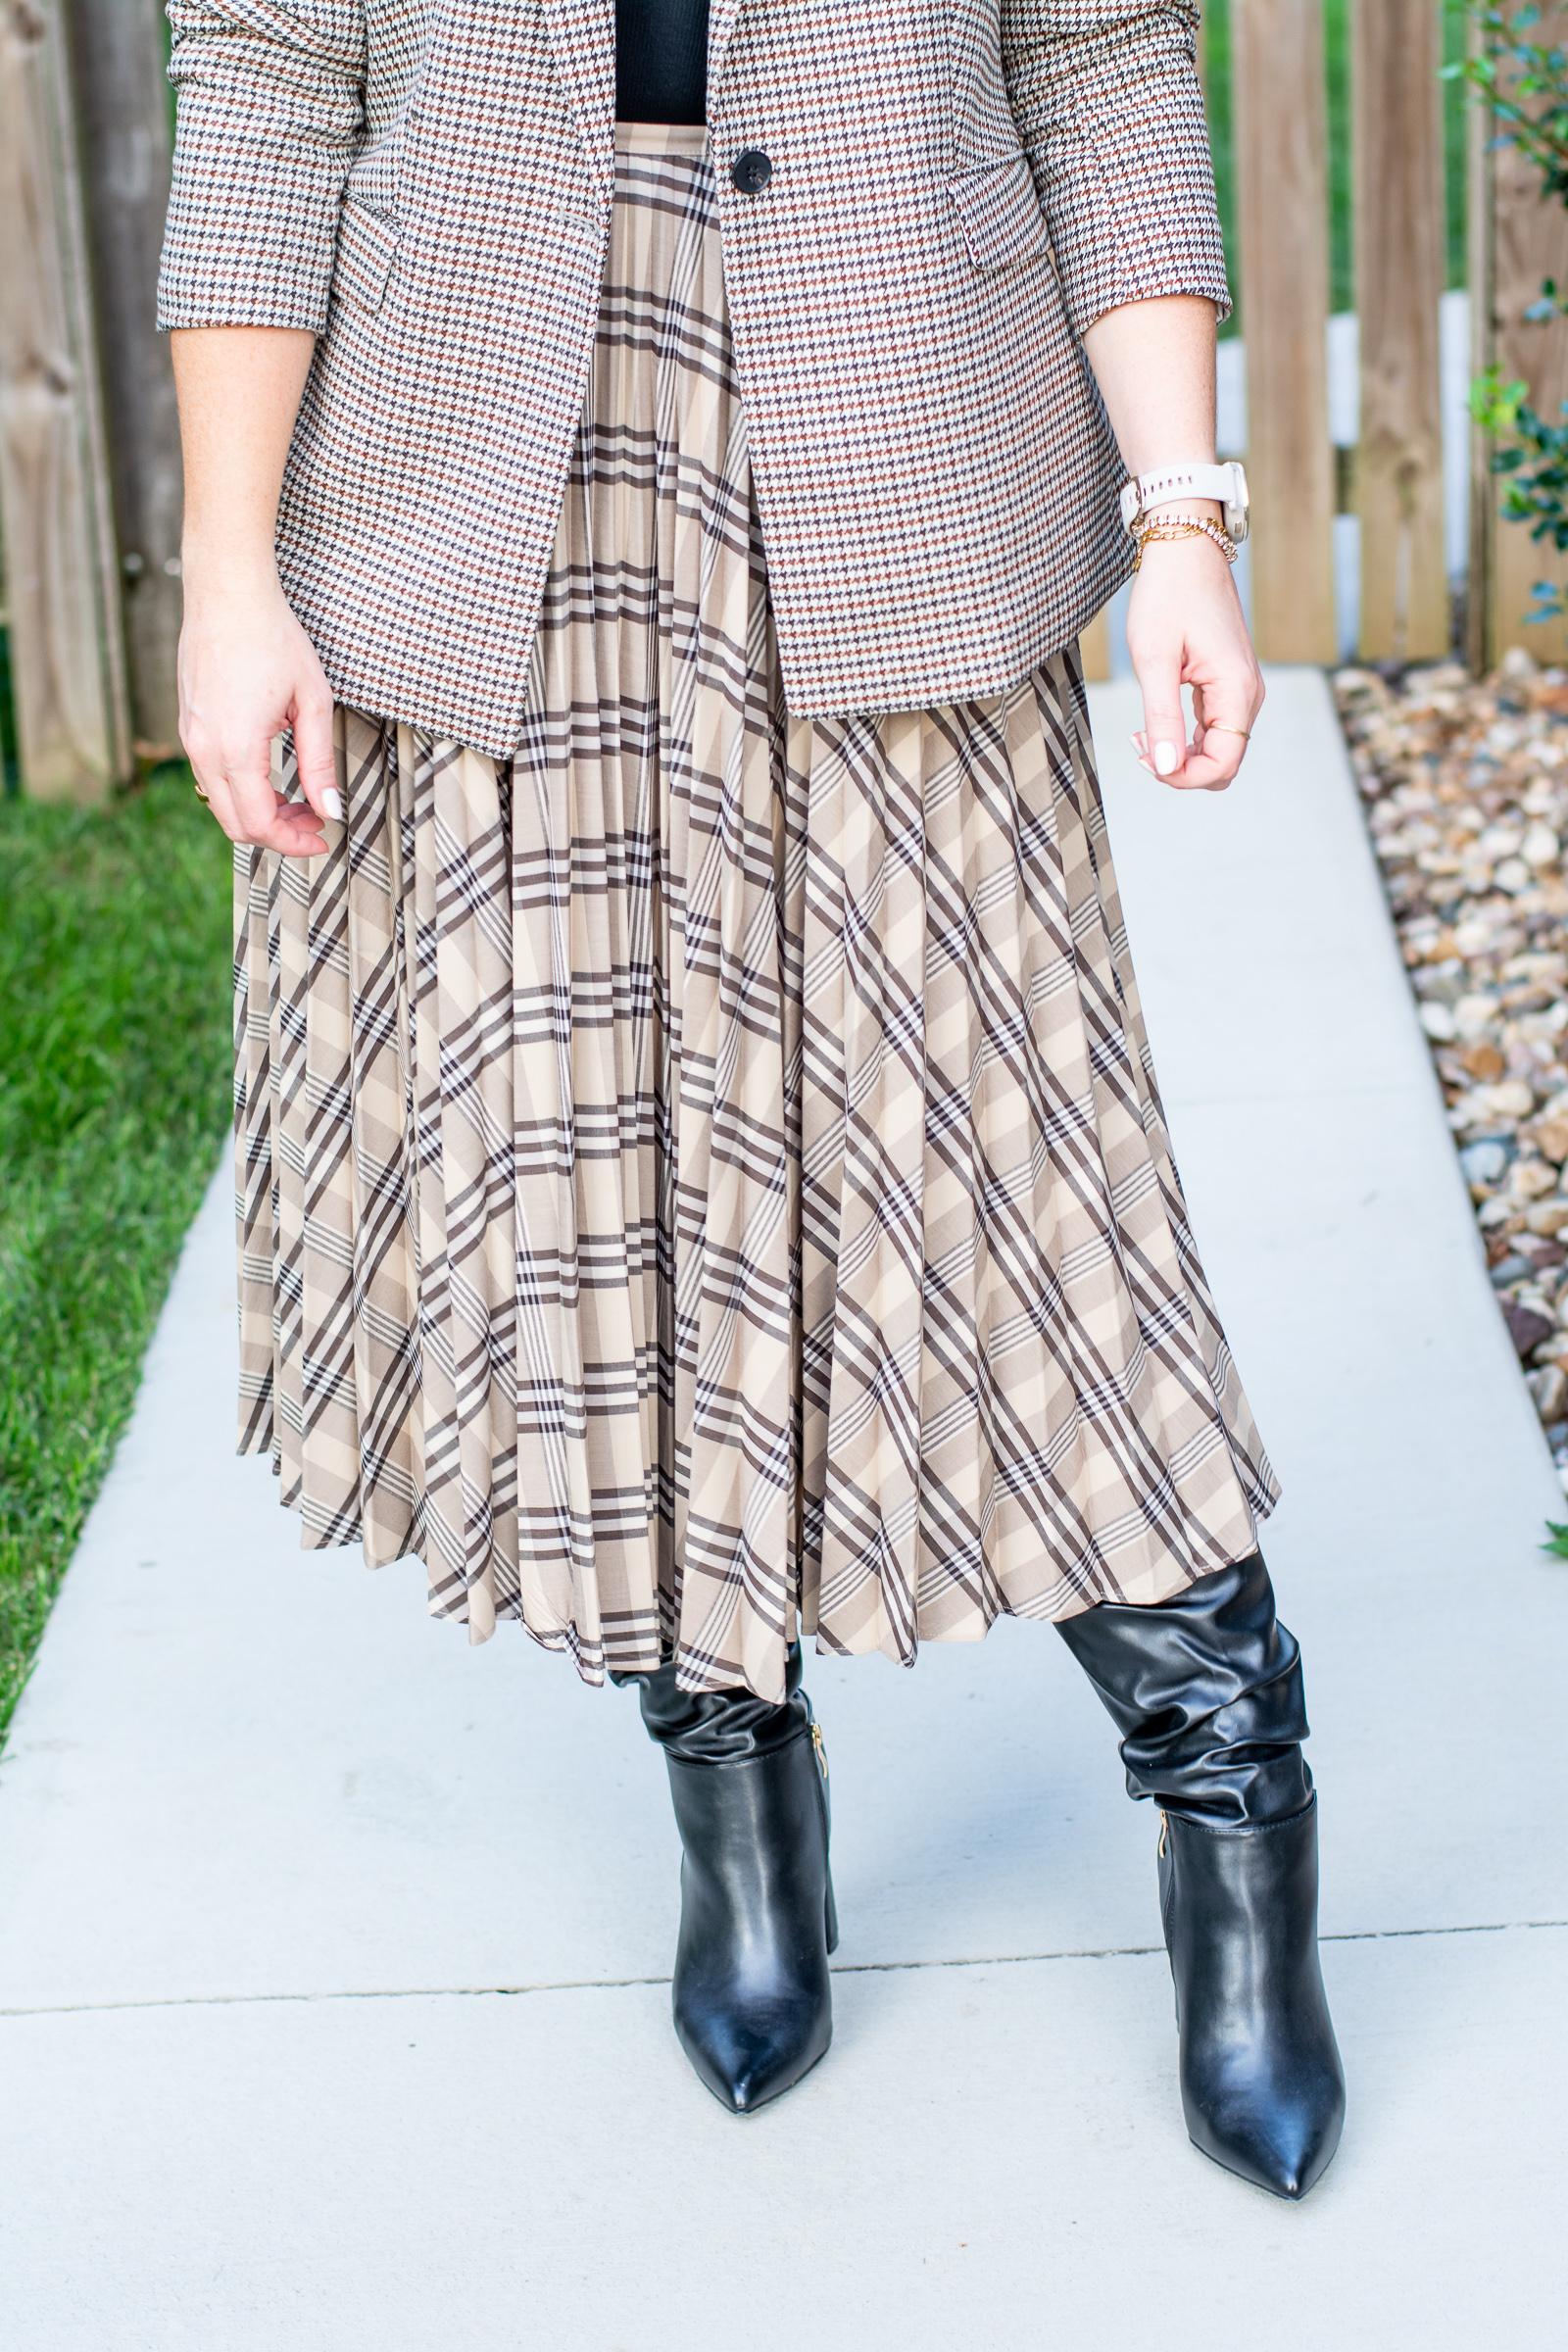 Black Slouchy Boots with a Plaid Midi Skirt. | LSR